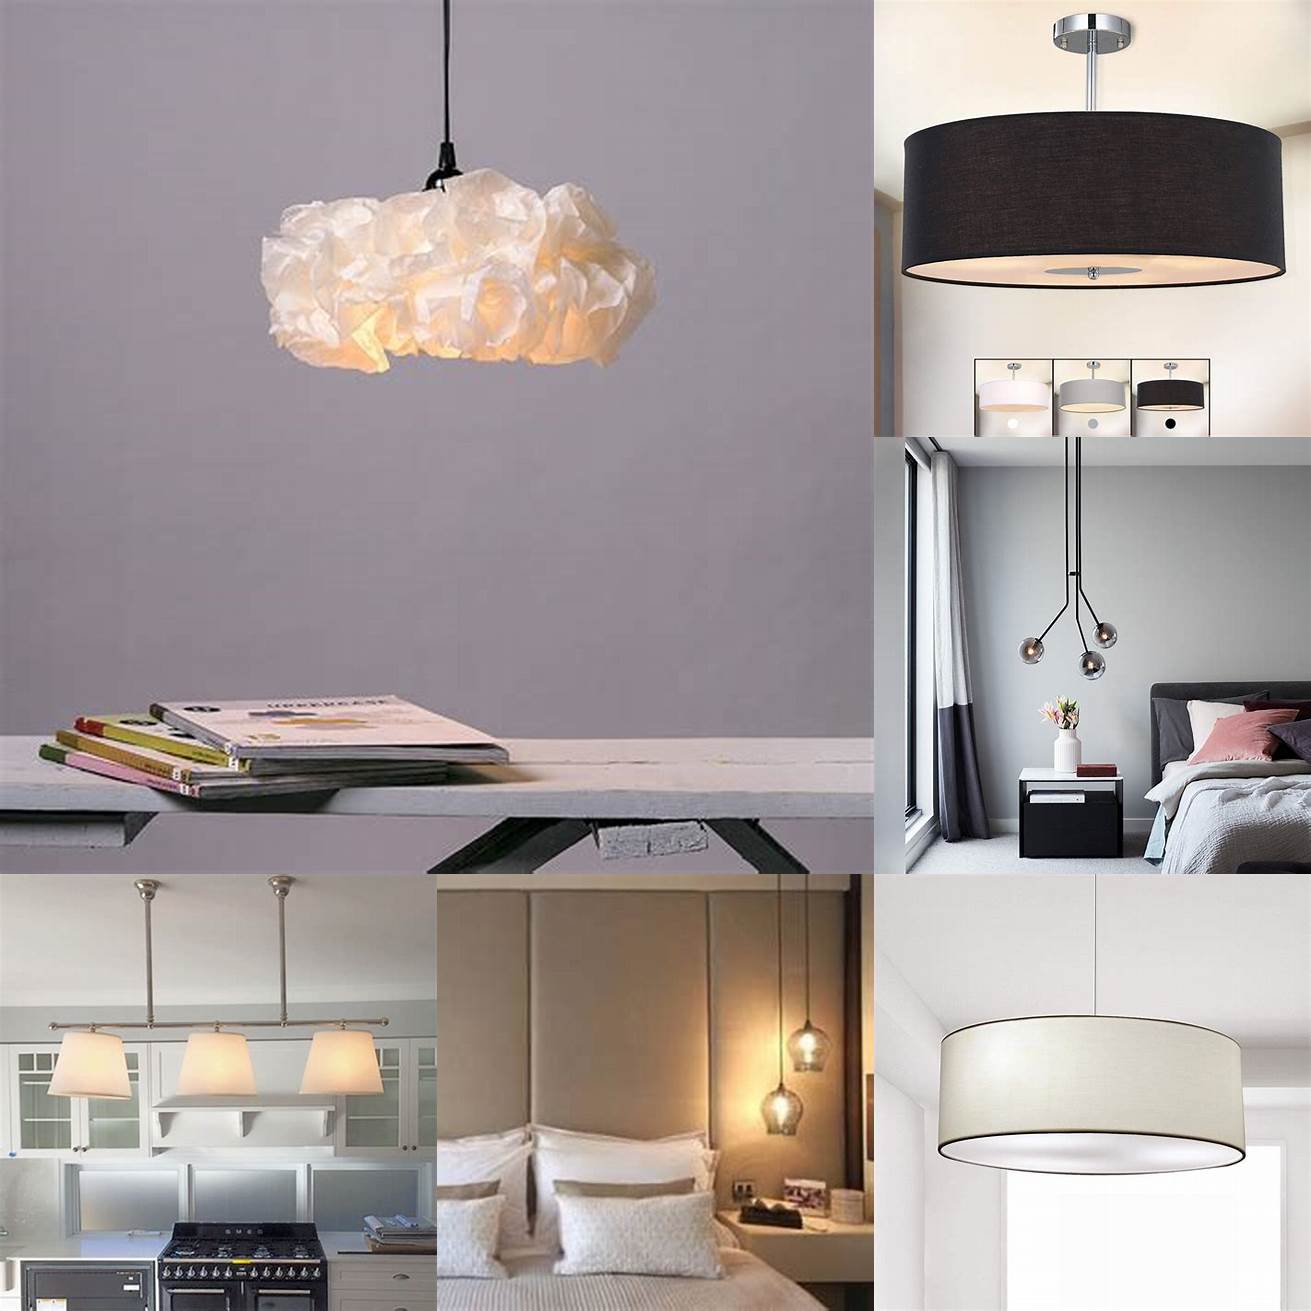 In the bedroom Choose a pendant light with a fabric or paper shade to create a soft and romantic ambiance